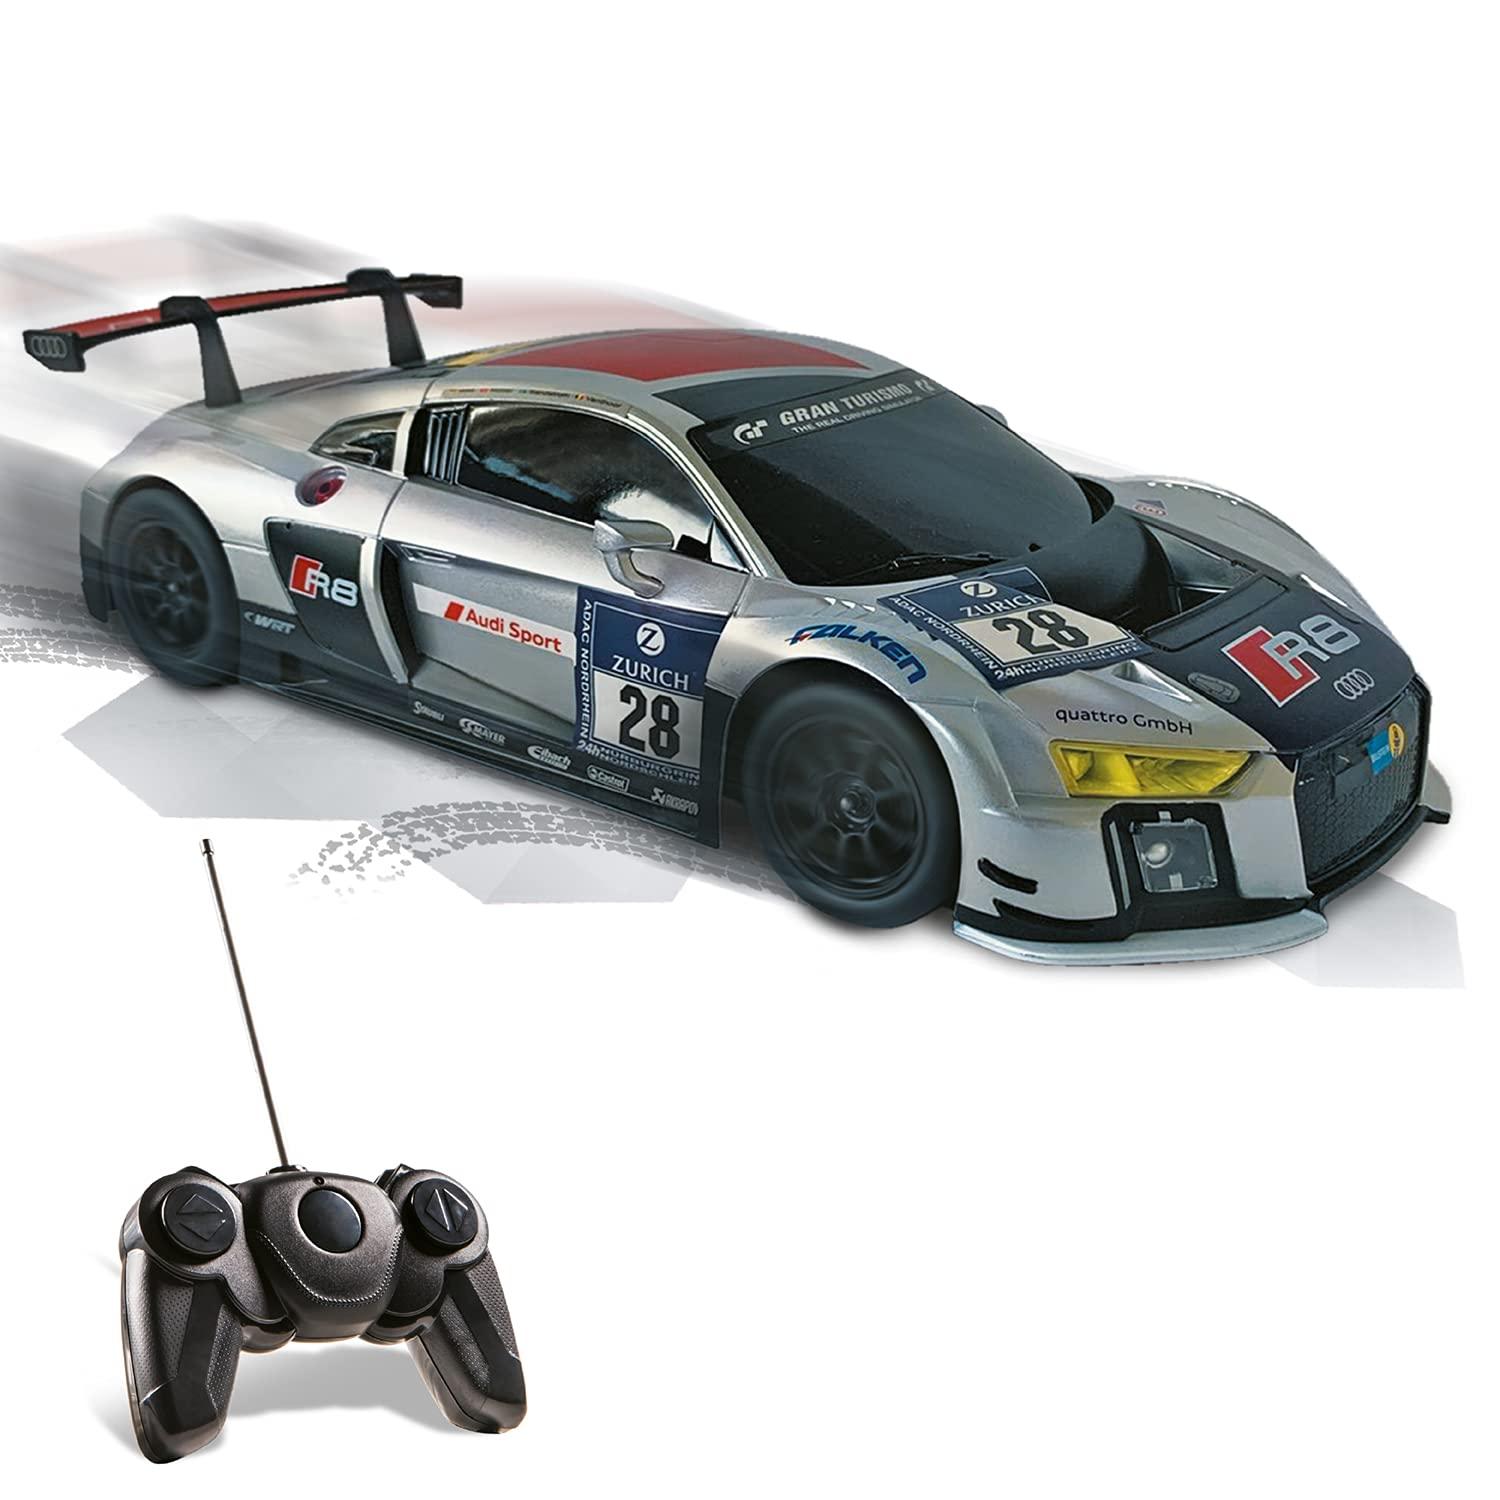 Audi Toy Car Remote Control: Durable and long-lasting design with key features and solid specifications.